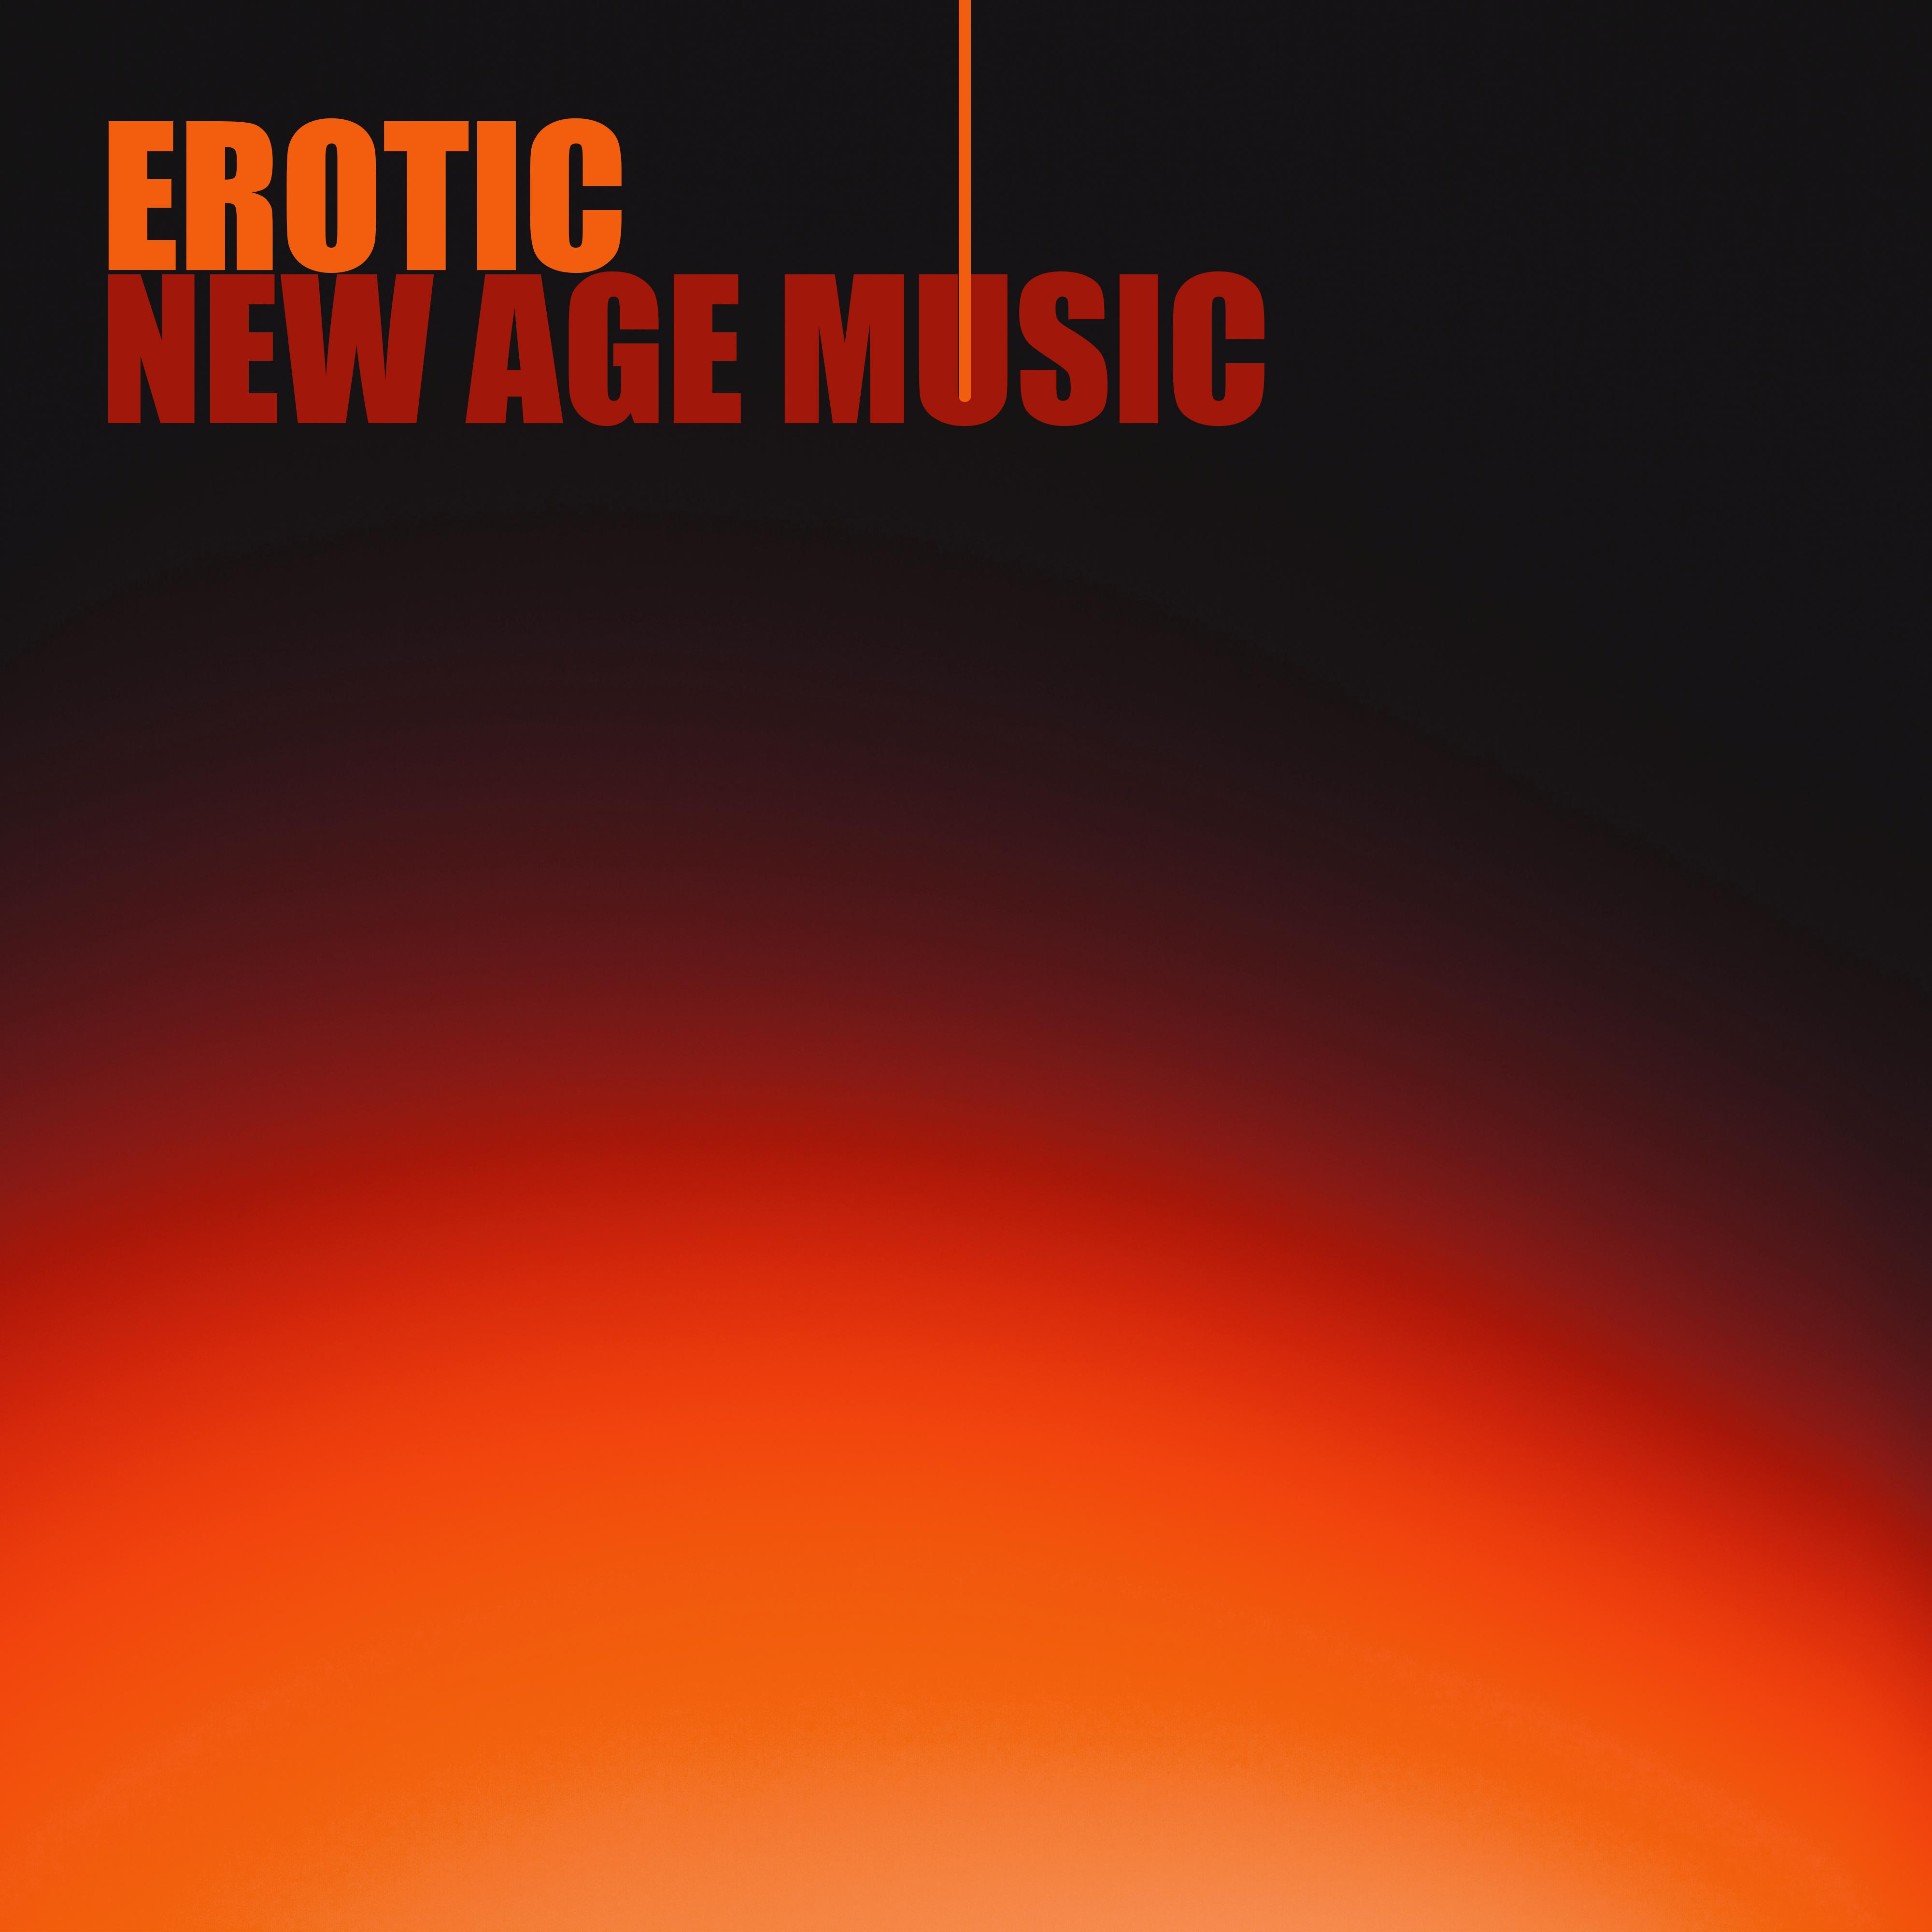 Erotic New Age Music – Soft Sounds to Rest, Music to Calm Down, Romantic Night with New Age Sounds